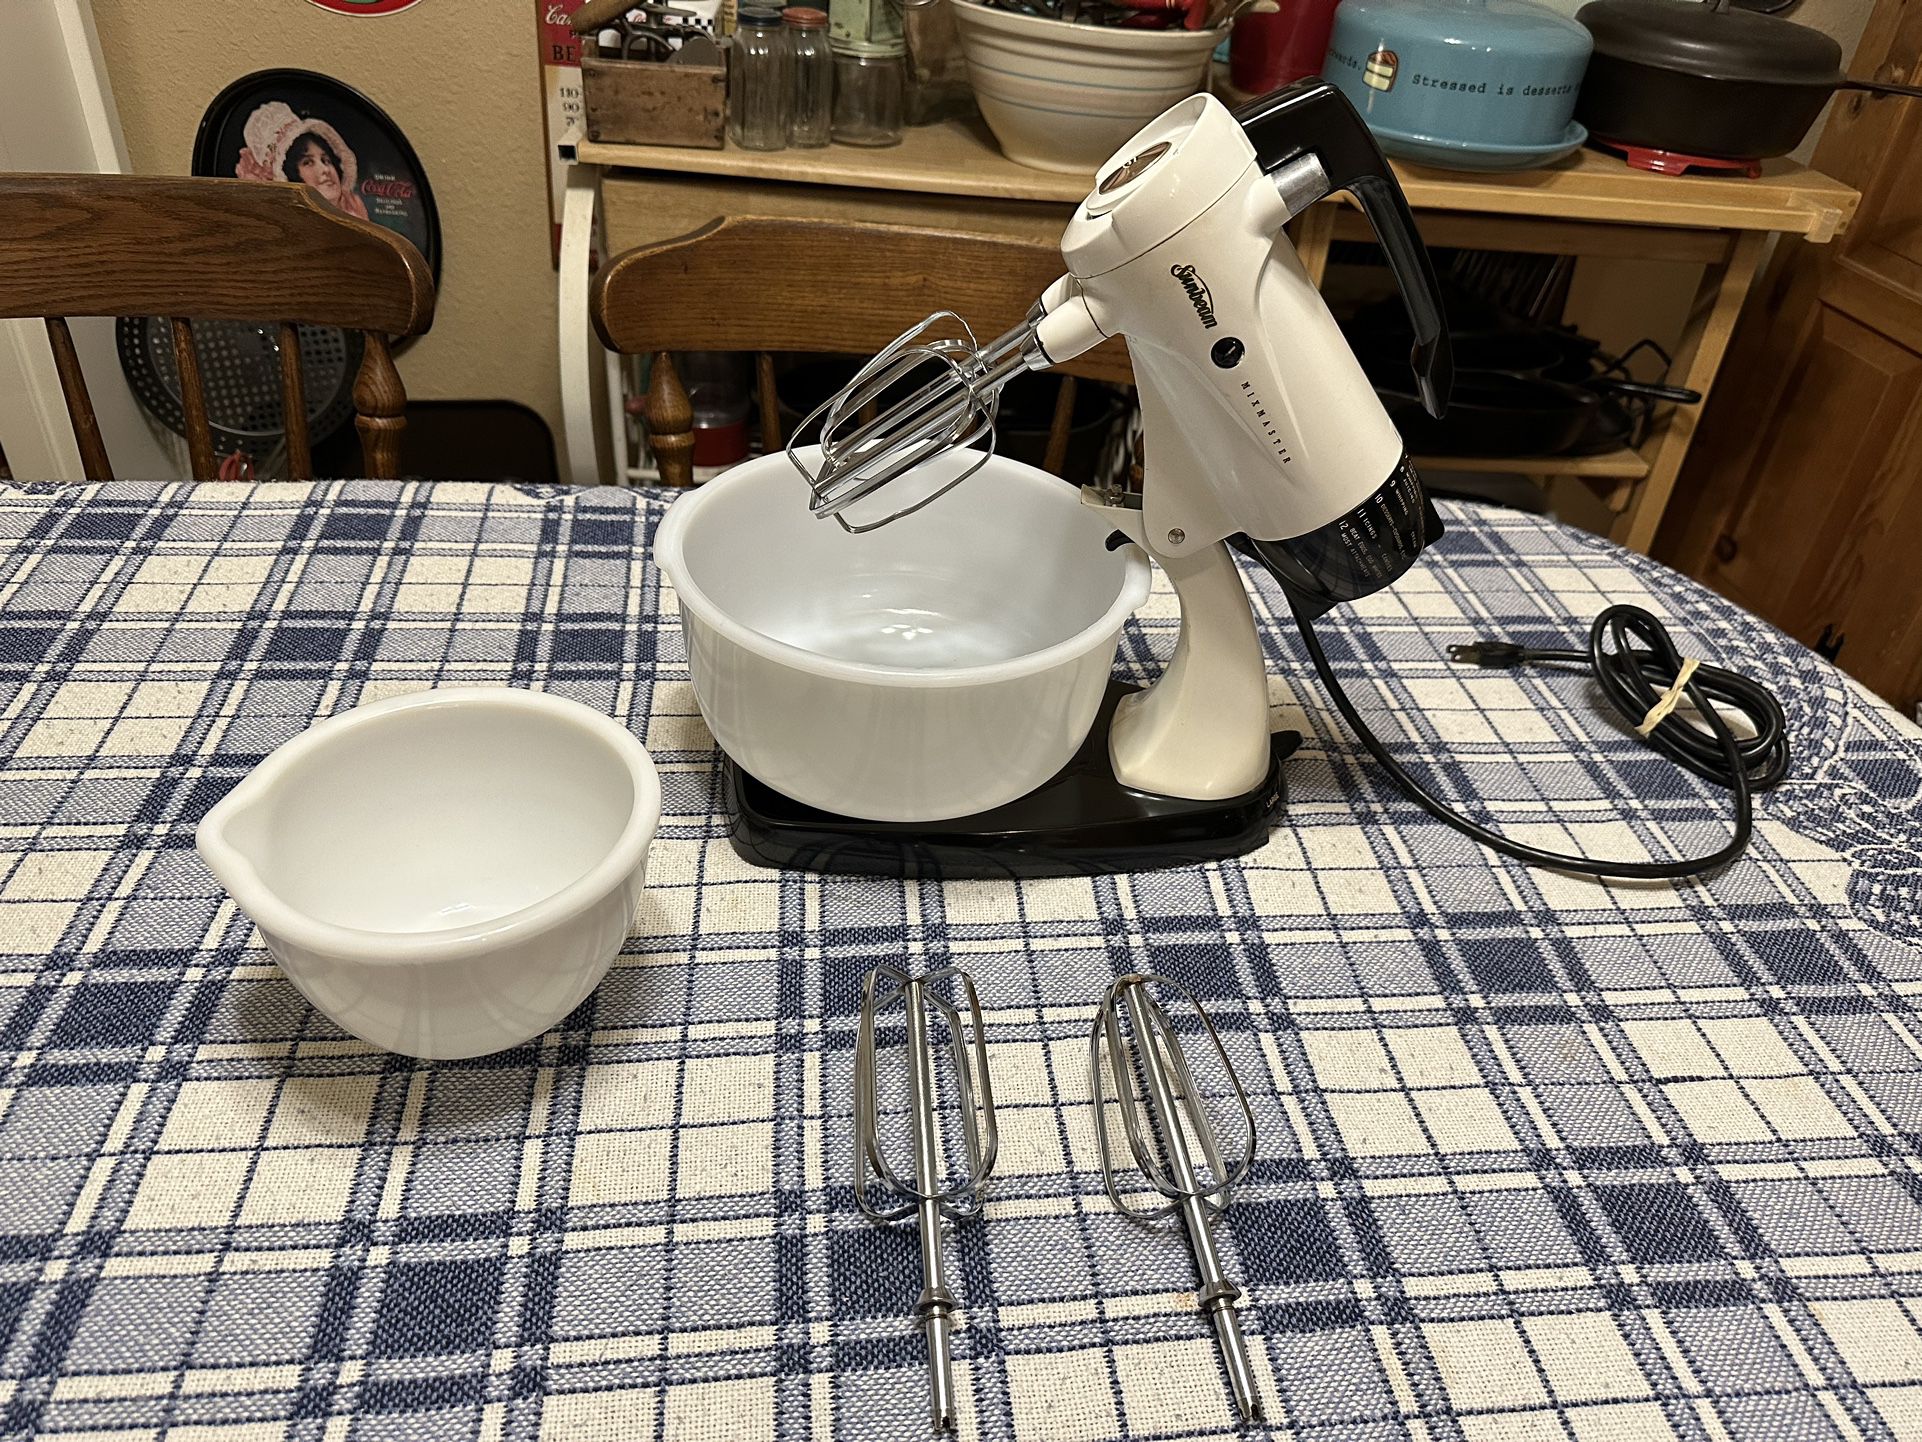 Sunbeam MixMaster Stand Mixer for Sale in Whittier, CA - OfferUp